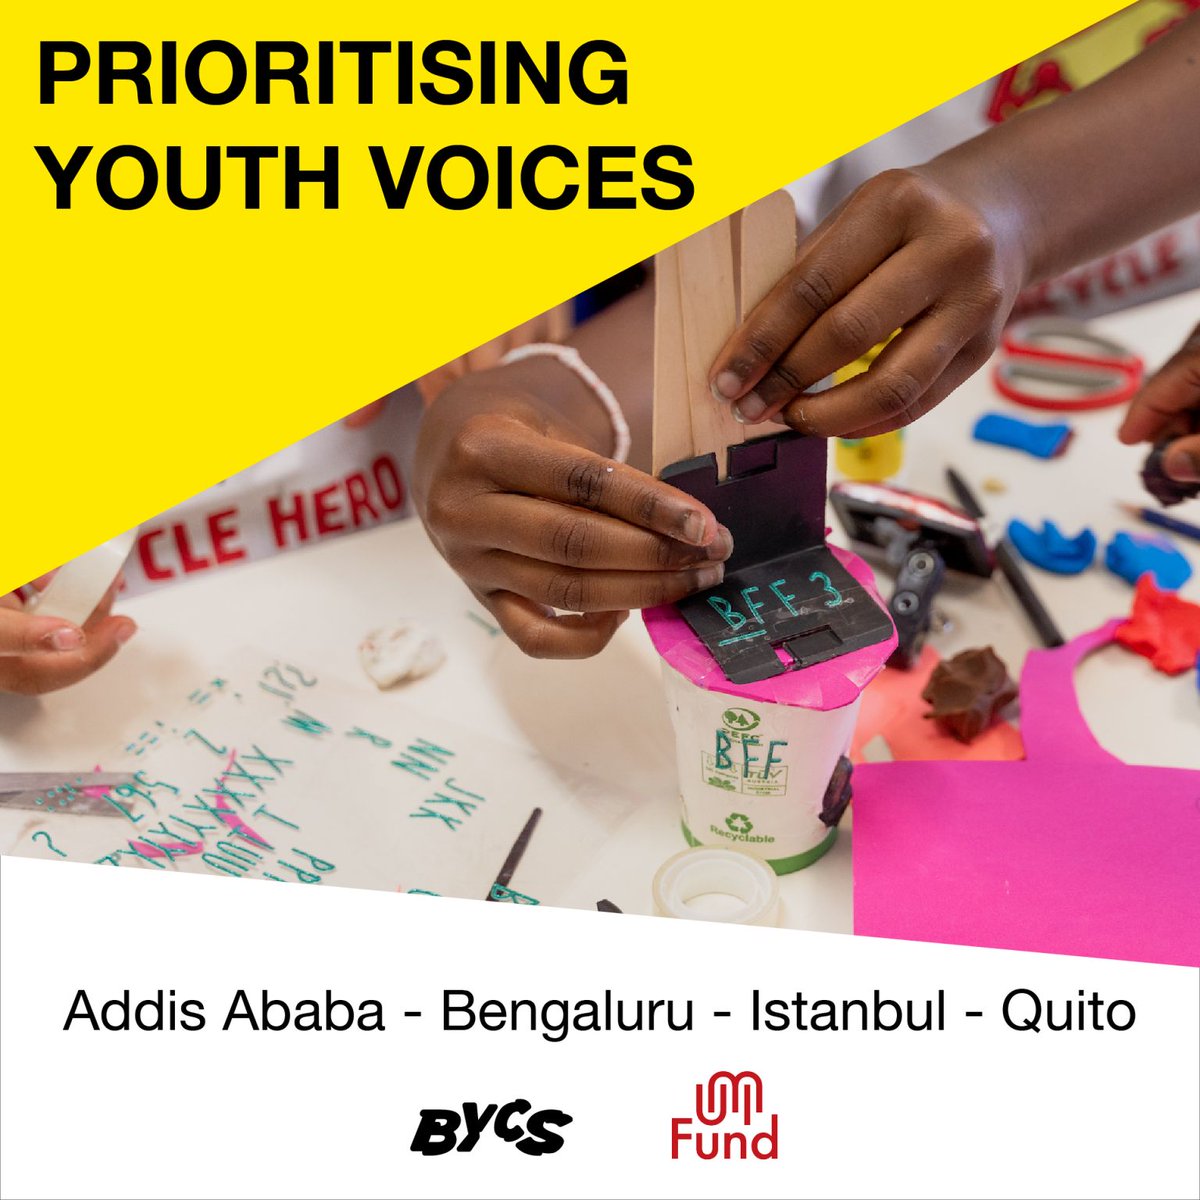 On International Children's Day, @EgreMengedImpac is working with @BYCS_org and is excited to announce that a new project to prioritize youth voice in cycling change is happening in Addis Ababa. More @ bycs.org/bicycle-heroes. @morphurbanspace @zincirkiranlar @Juegosciclistasec